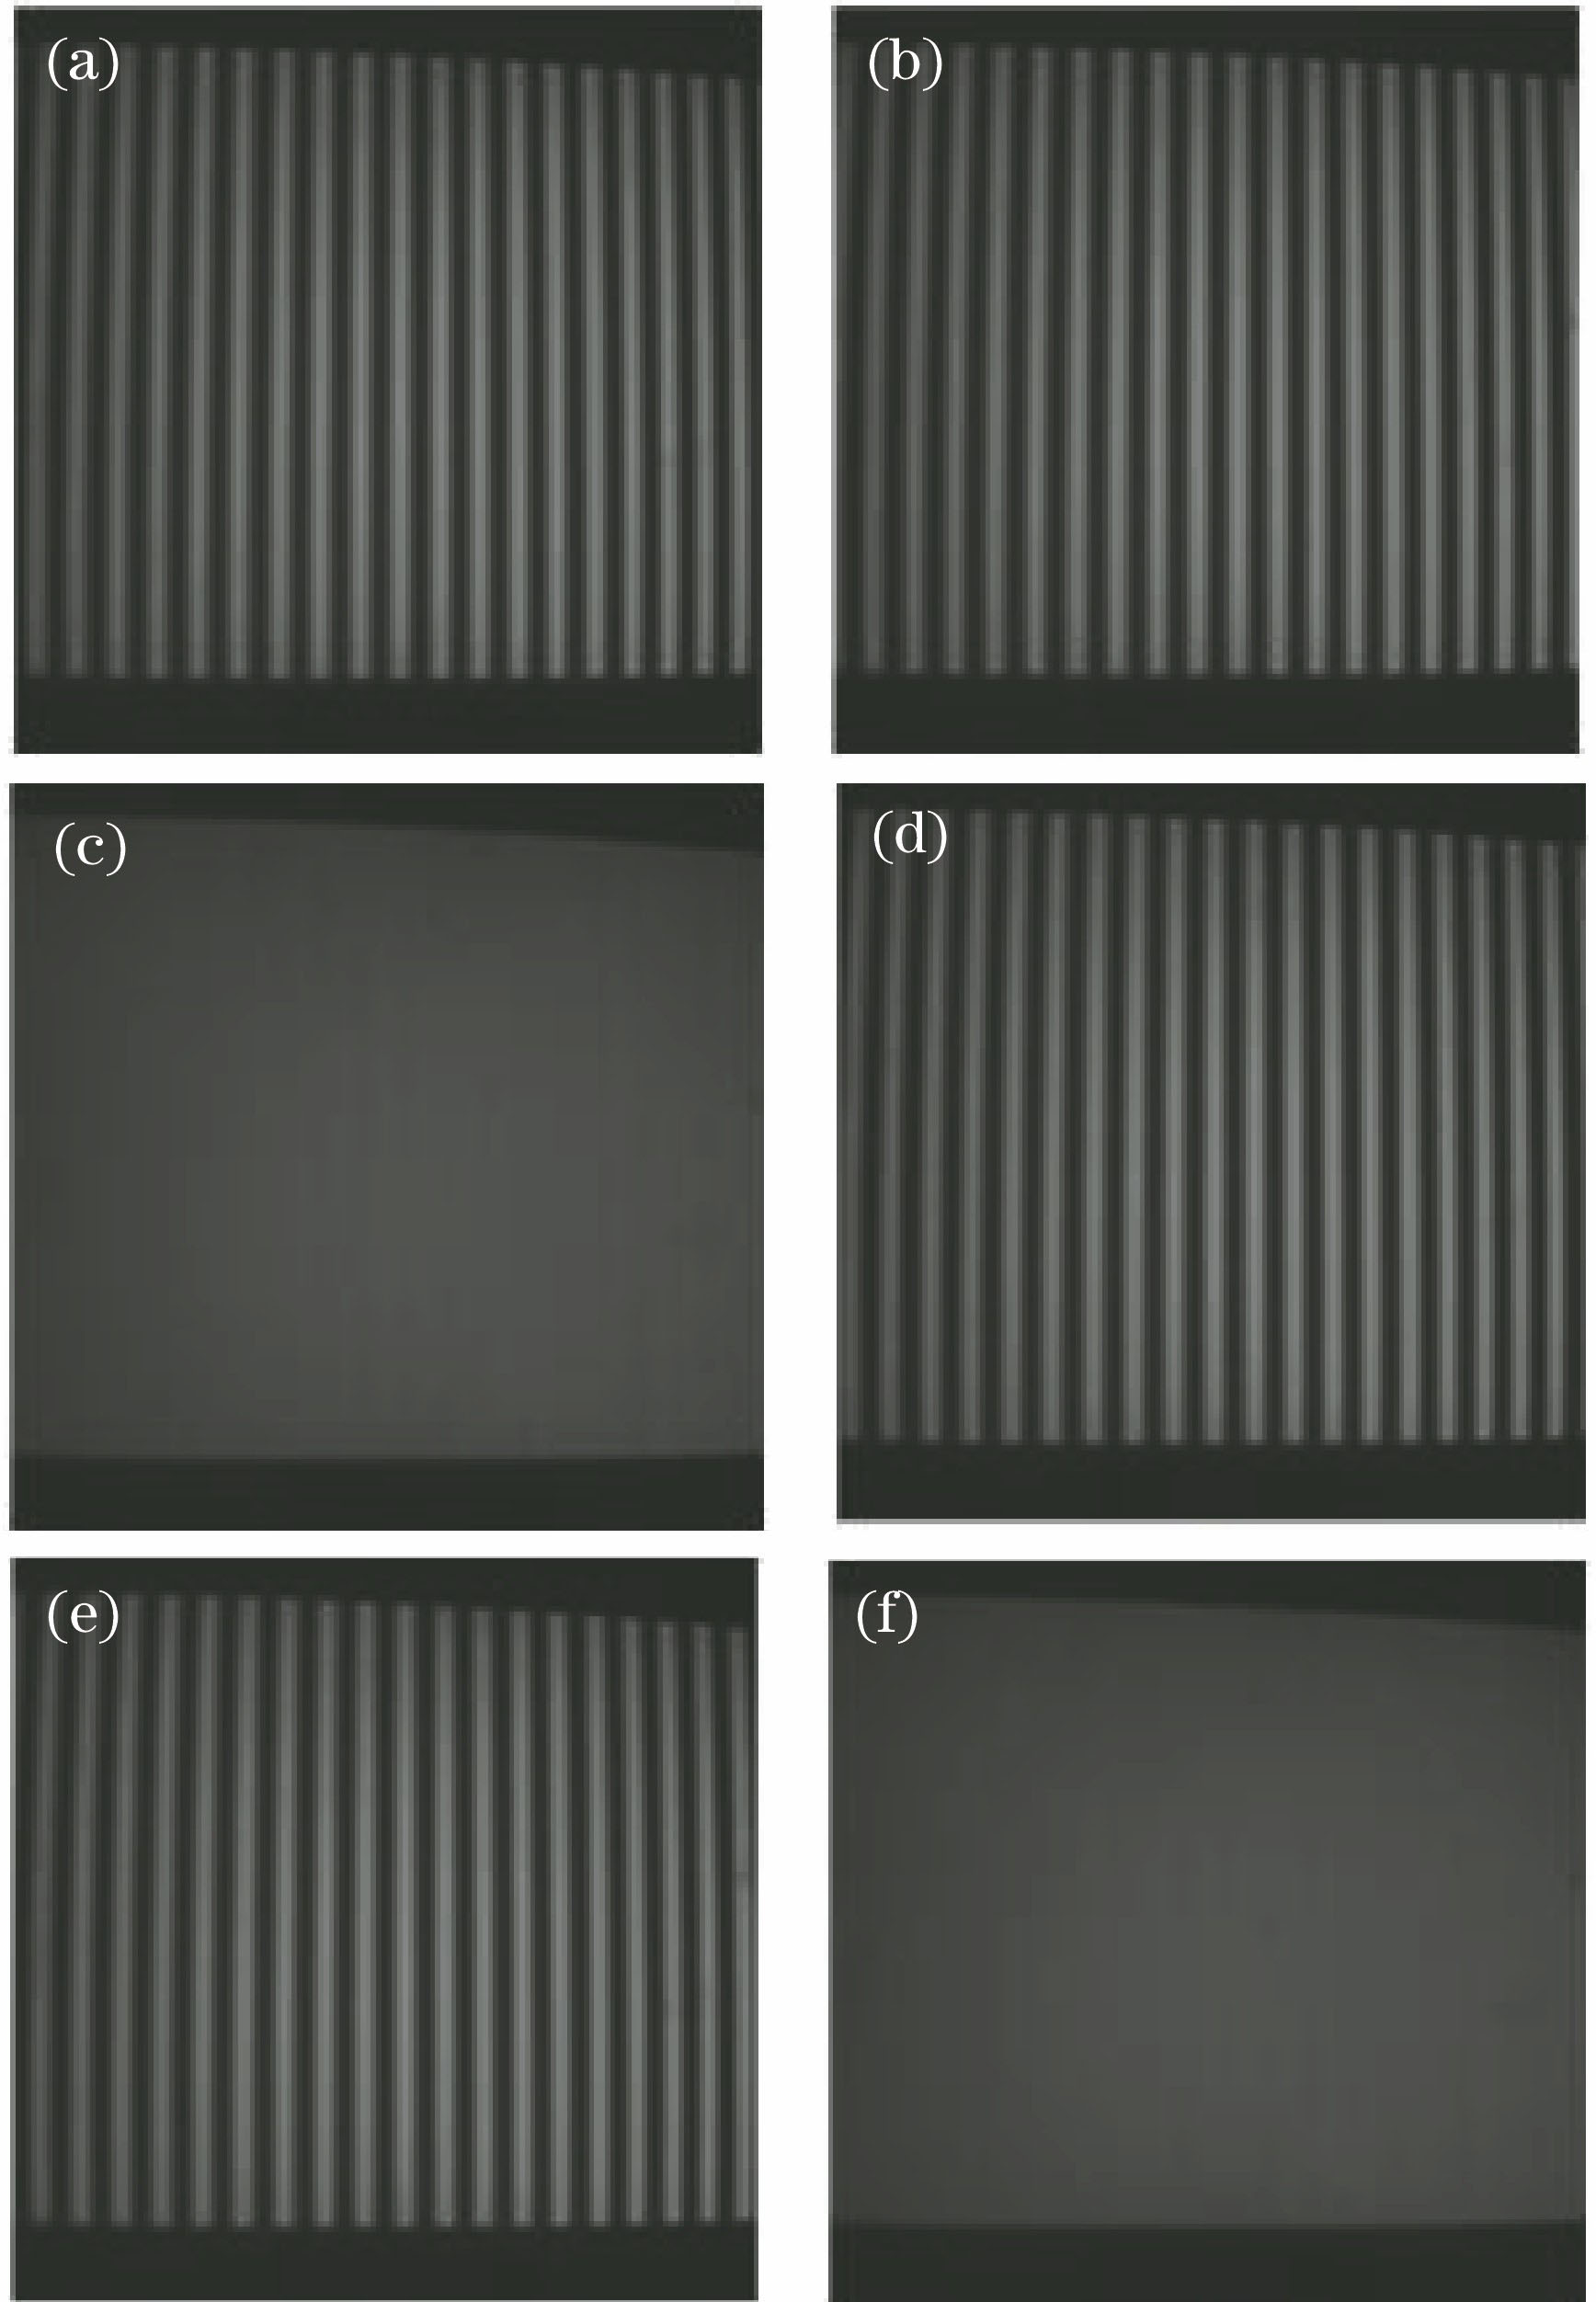 Complementary principle. (a) 0° phase-shift grating; (b) 180° phase-shift grating; (c) 0° and 180° phase-shift superposition grating; (d) 90° phase-shift grating; (e) 270° phase-shift grating; (f) 90° and 270° phase-shift superposition grating